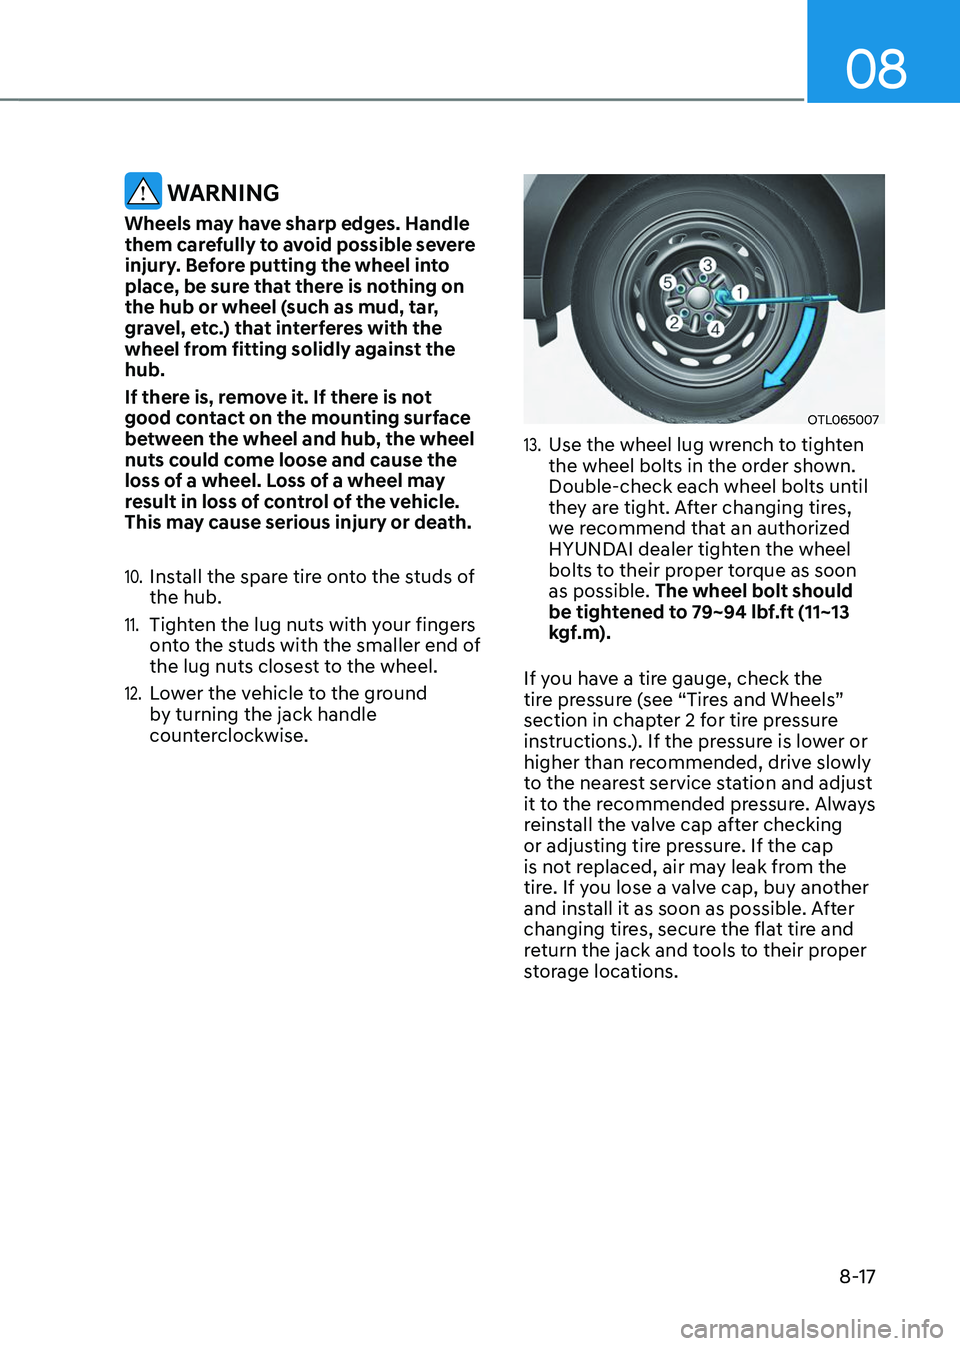 HYUNDAI TUCSON 2023  Owners Manual 08
8-17
 WARNING
Wheels may have sharp edges. Handle 
them carefully to avoid possible severe 
injury. Before putting the wheel into 
place, be sure that there is nothing on 
the hub or wheel (such as